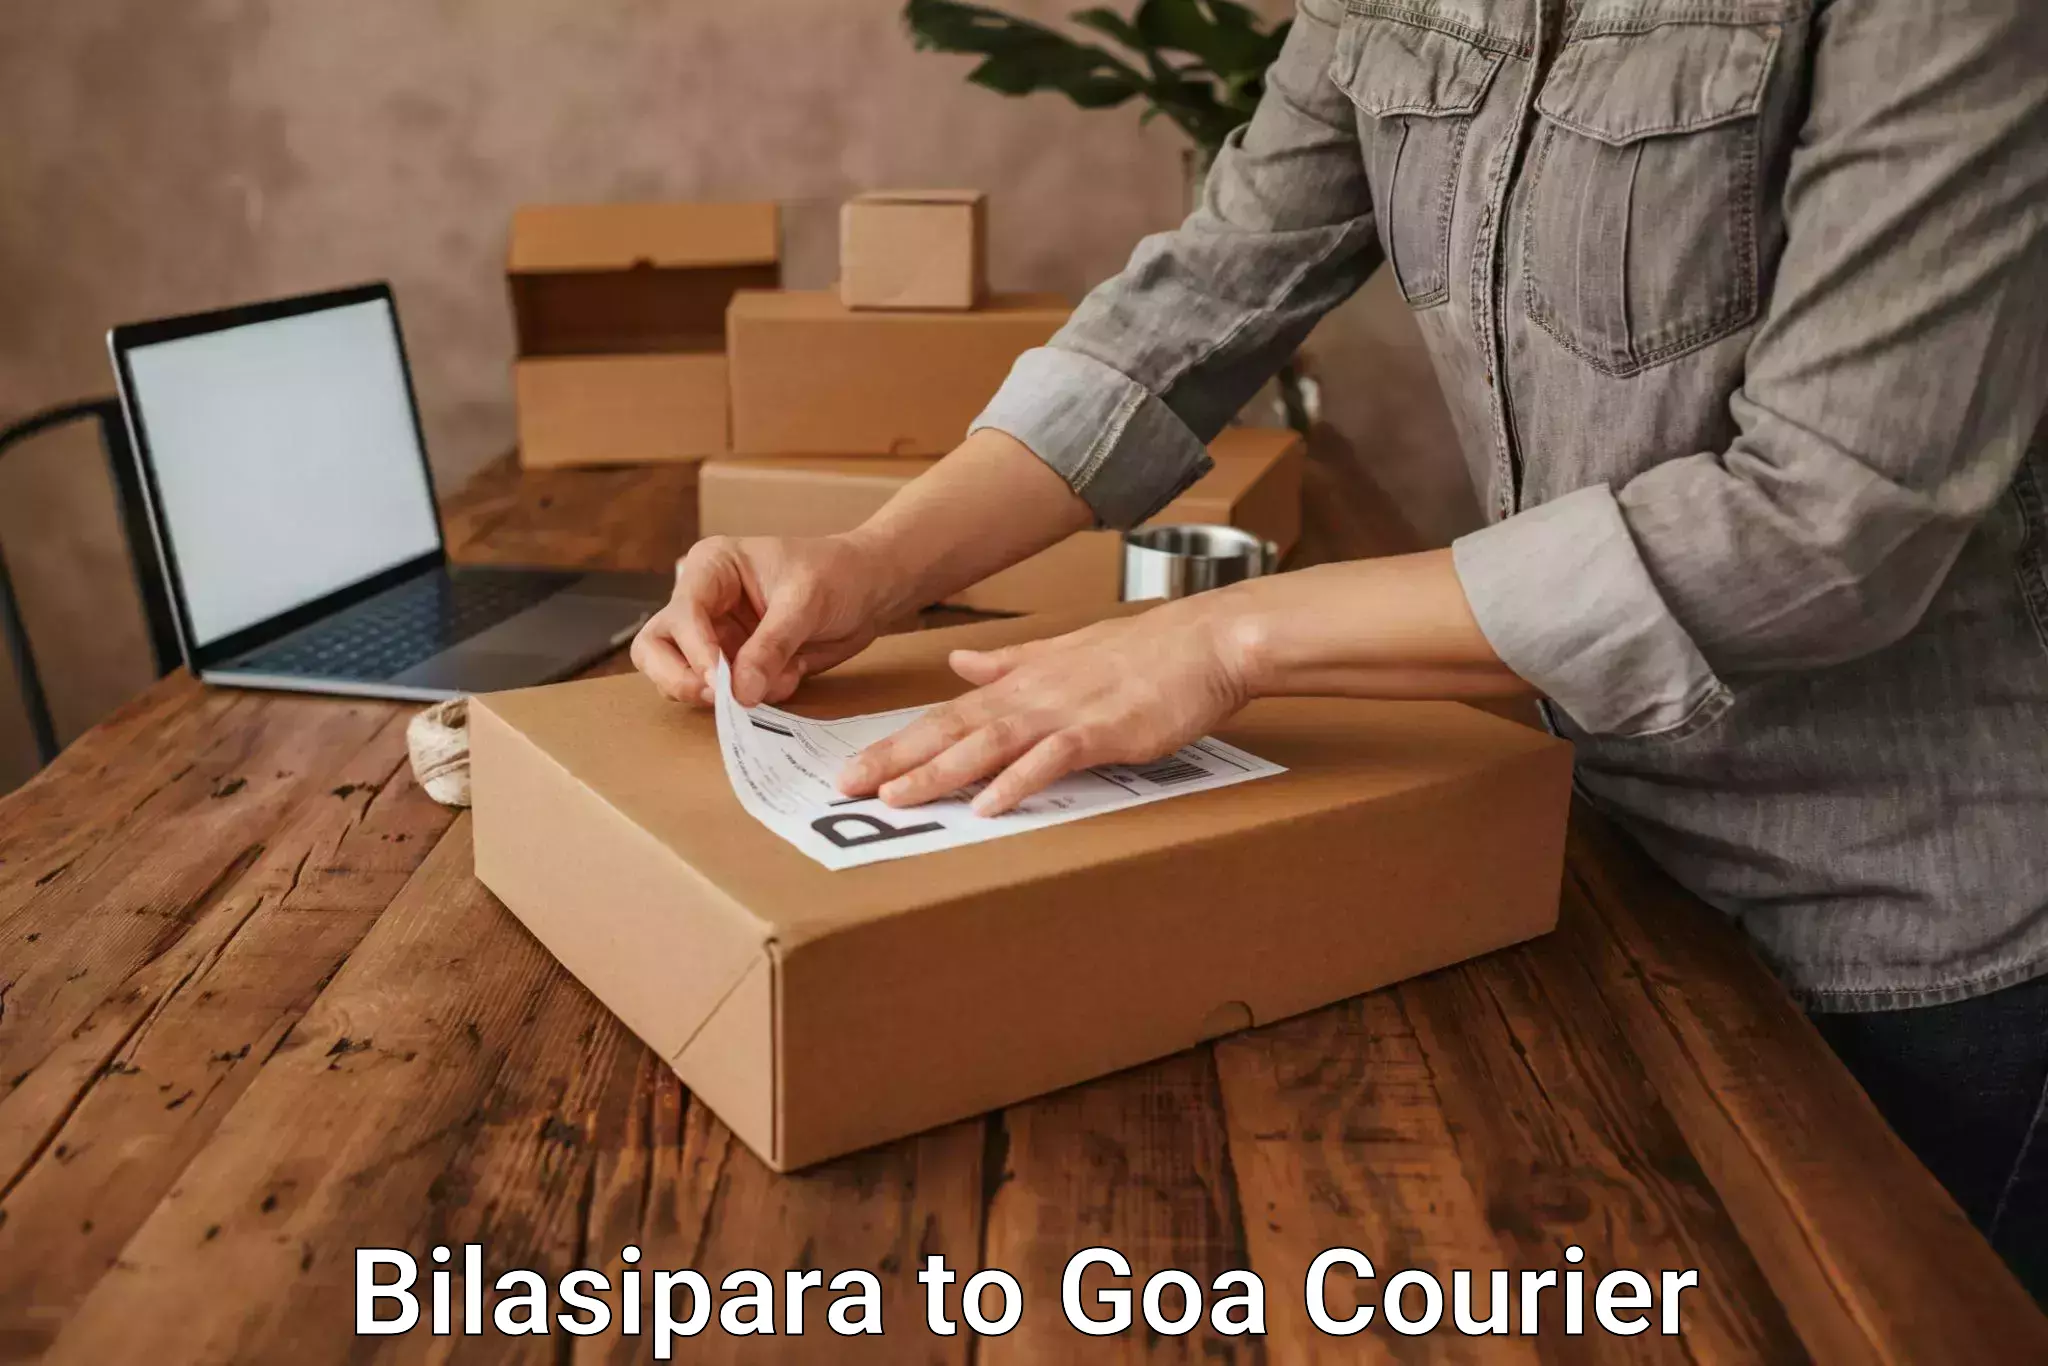 Cash on delivery service Bilasipara to Goa